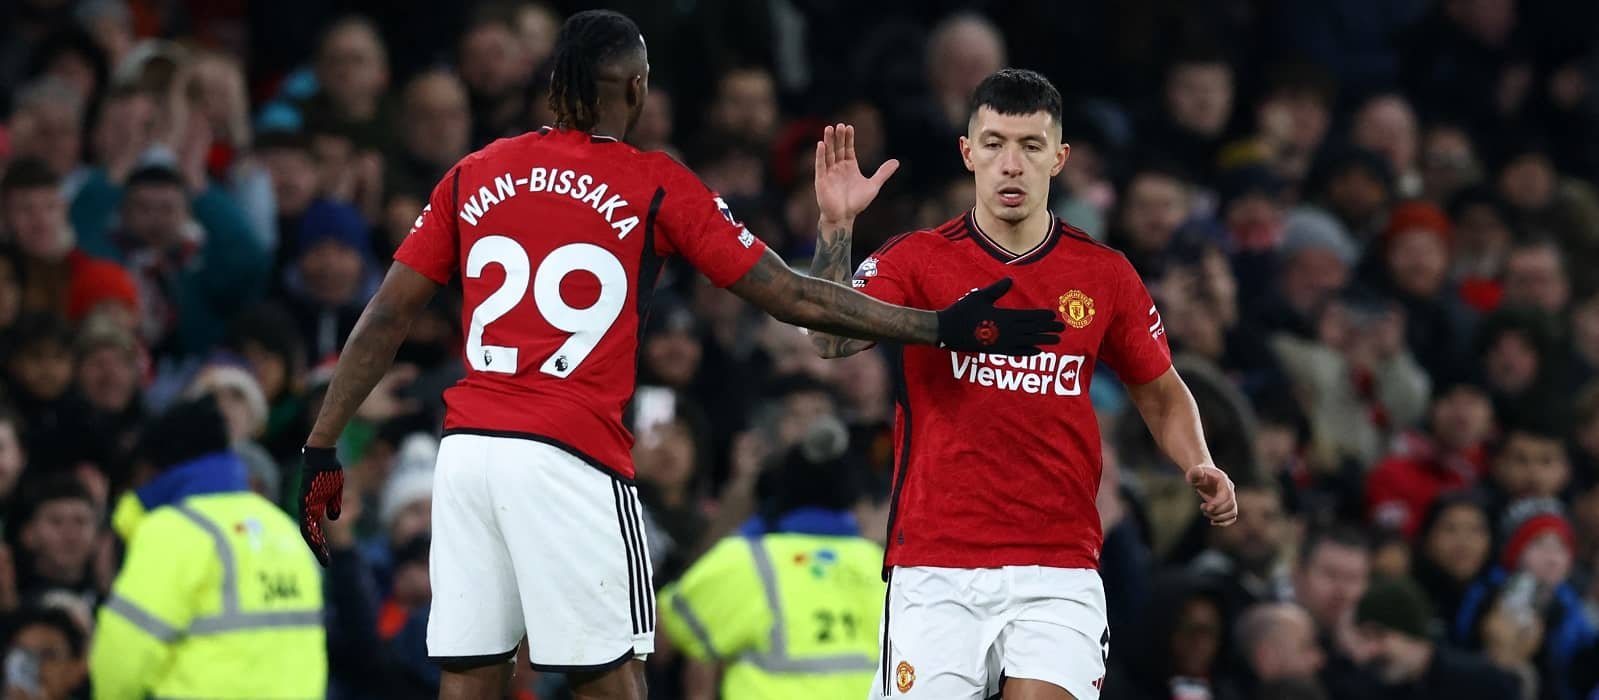 Man United make rare change to matchday plans ahead of clash vs. Brentford – Man United News And Transfer News